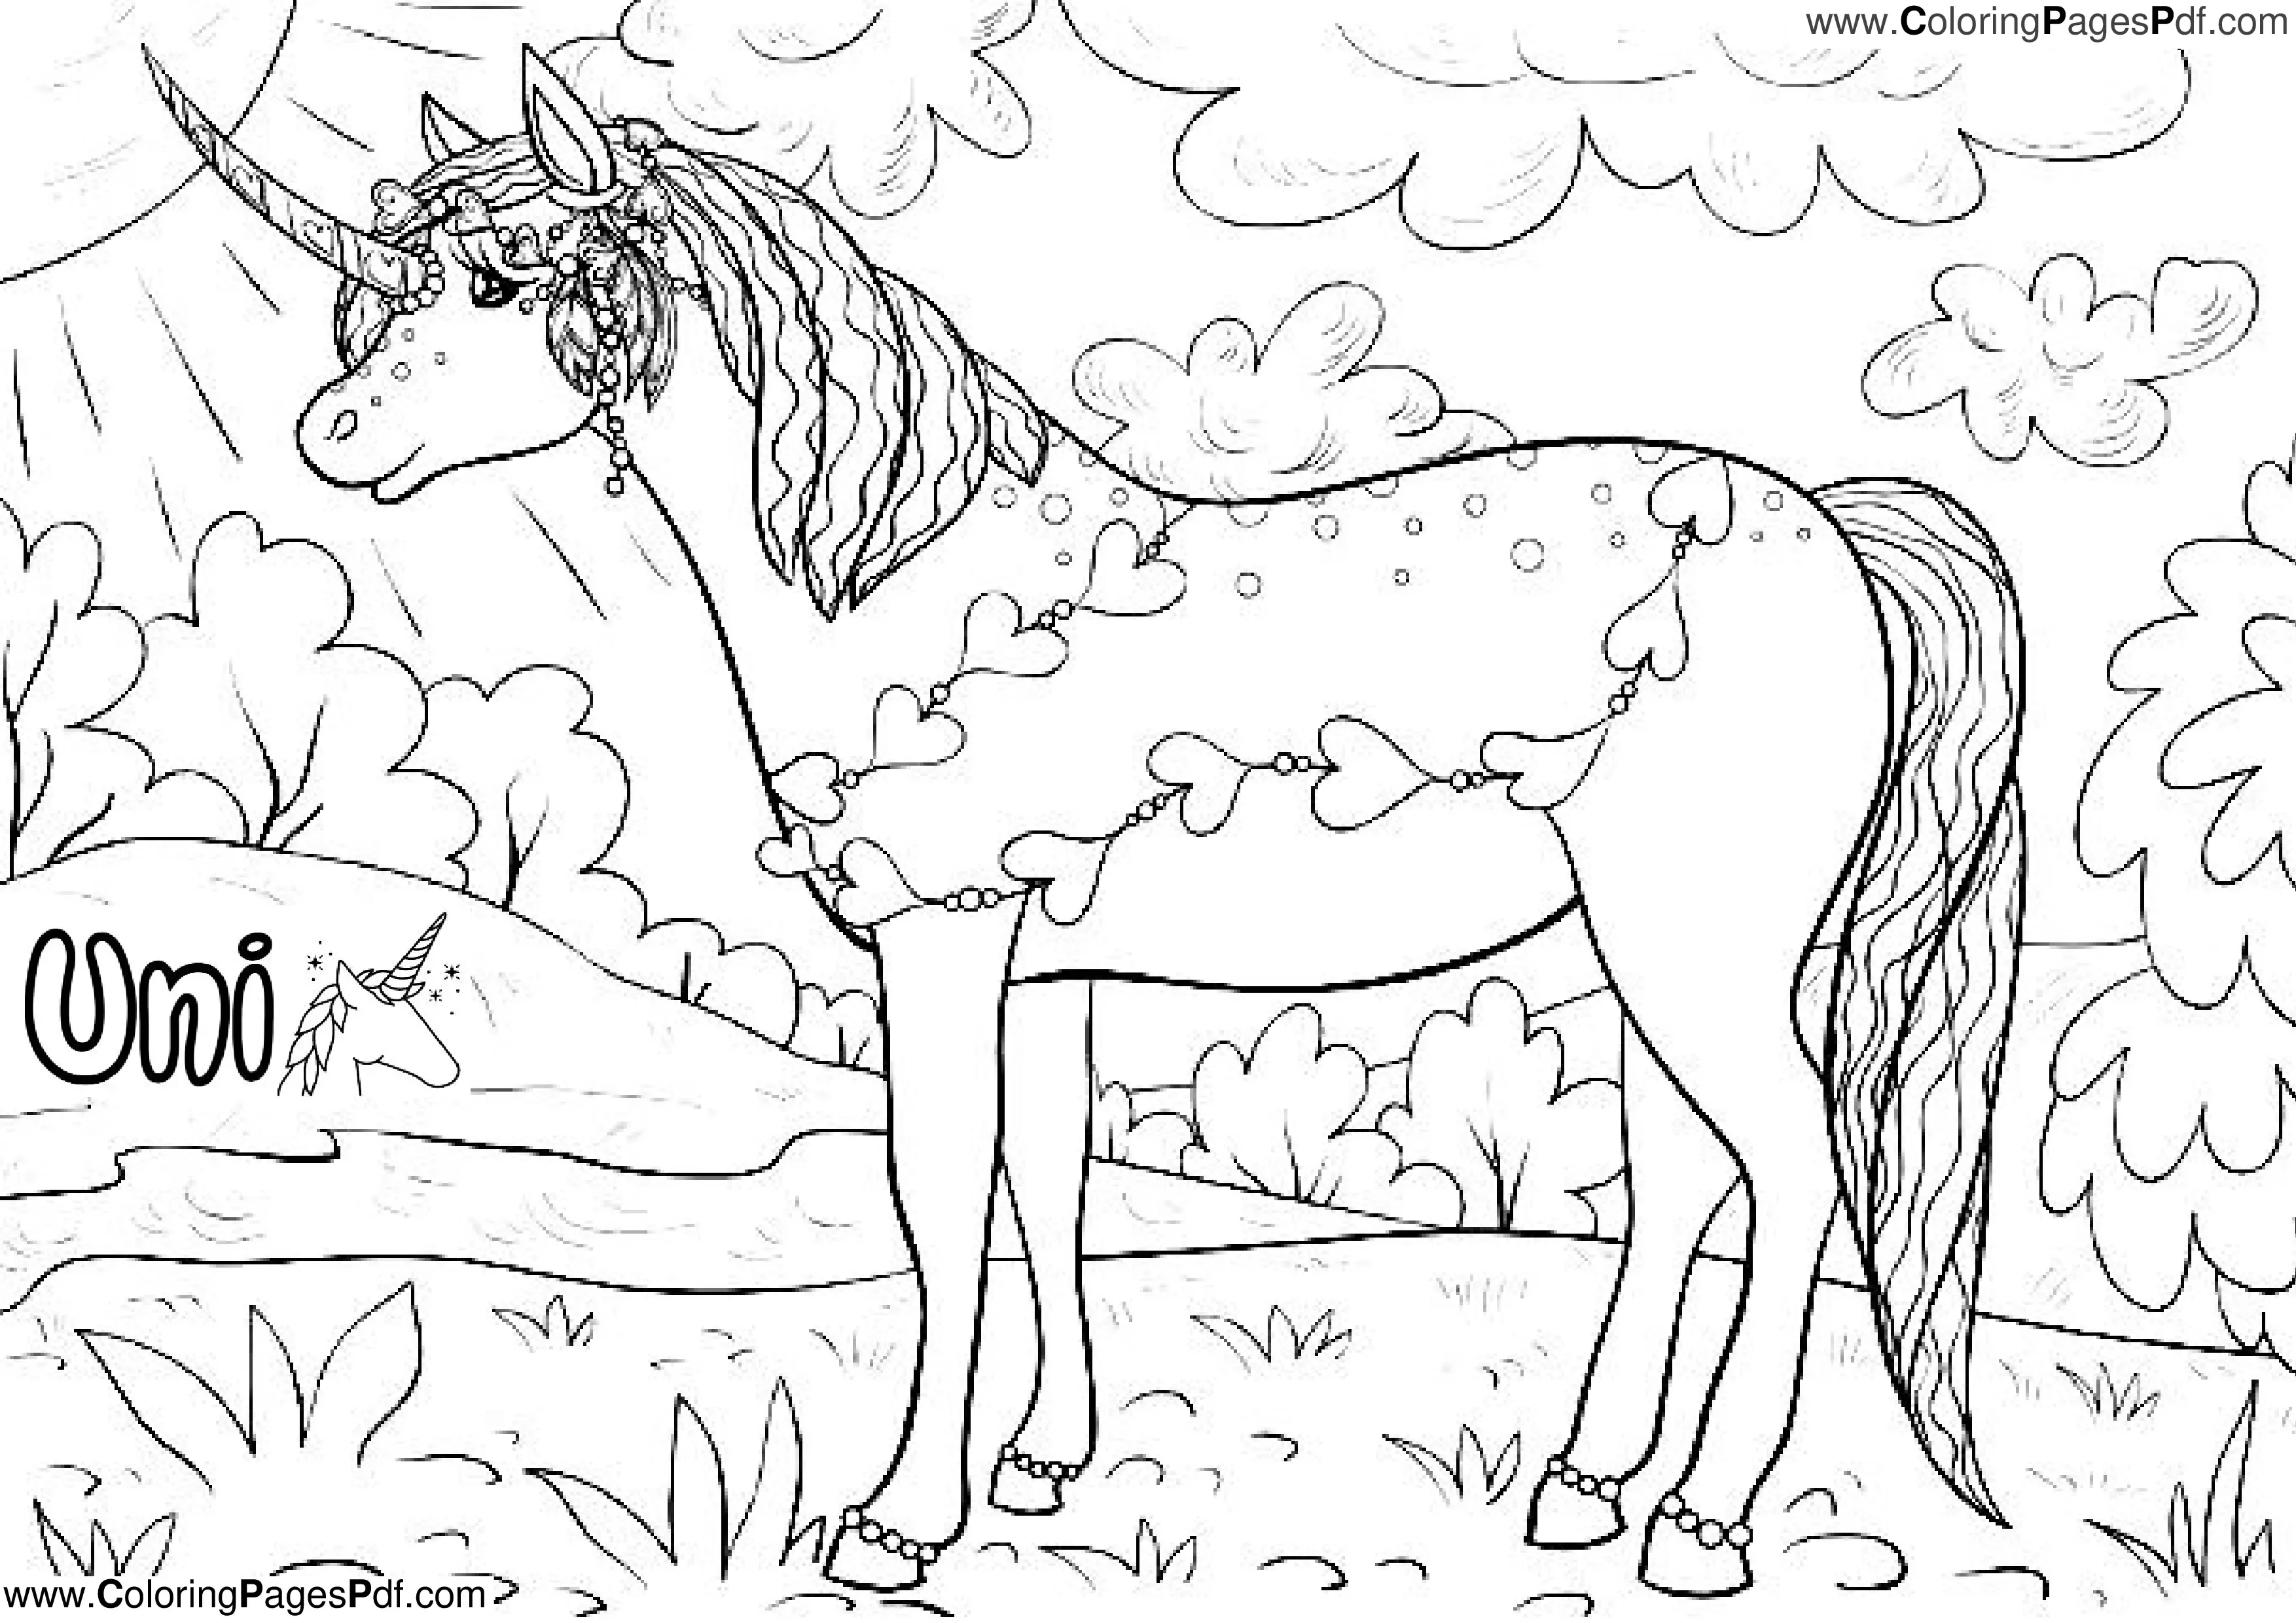 Unicorn coloring pages printable